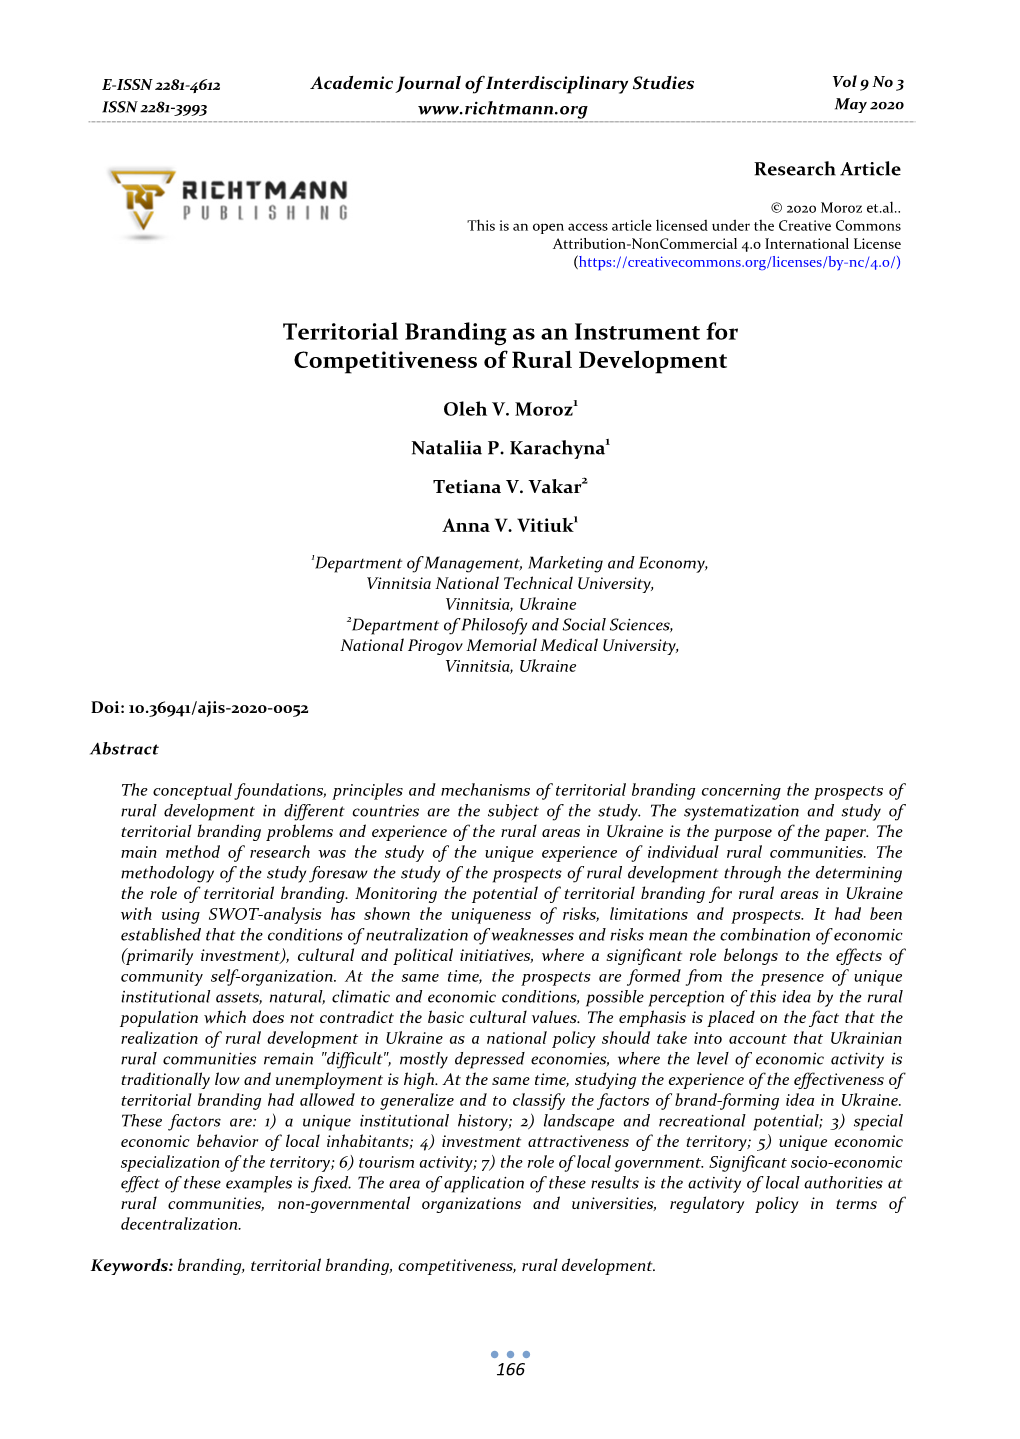 Territorial Branding As an Instrument for Competitiveness of Rural Development